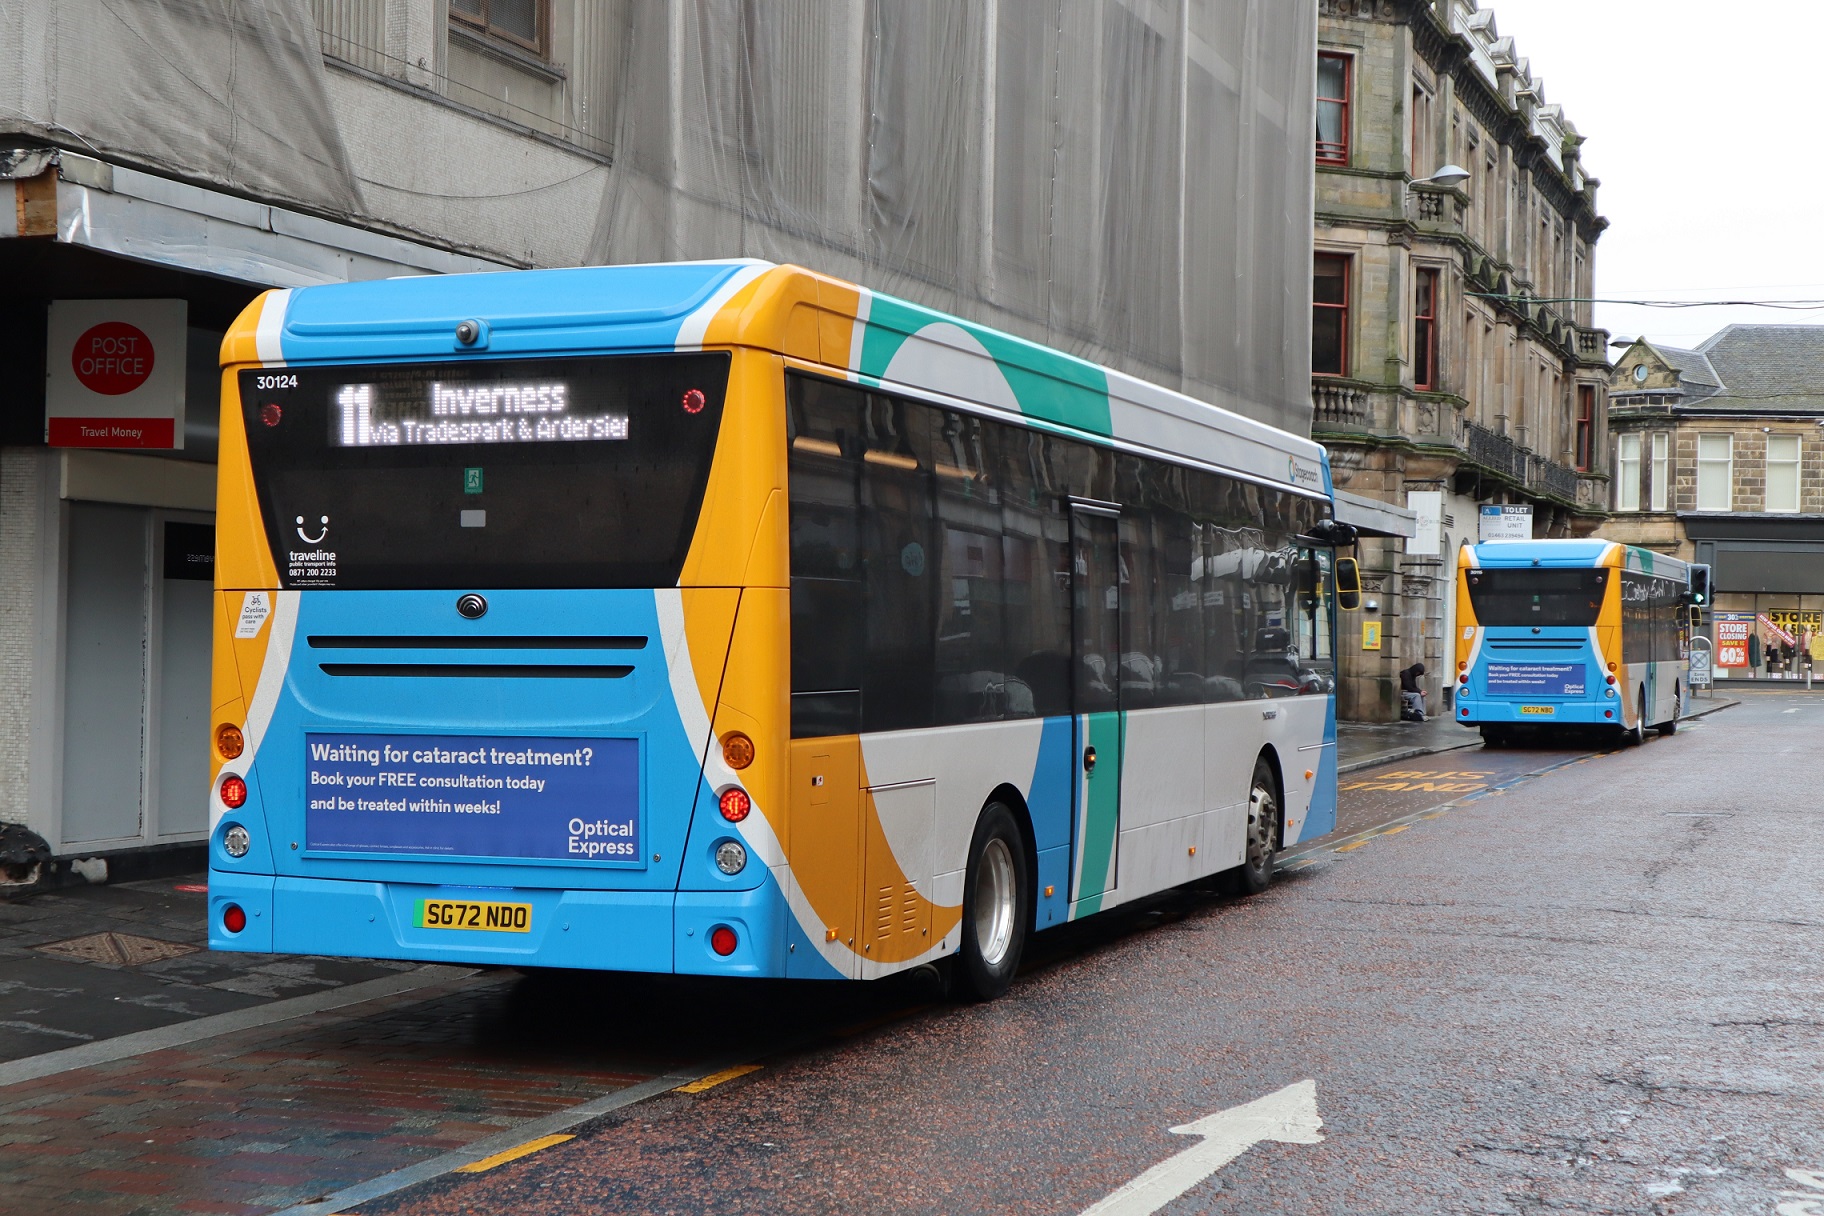 Stagecoach Inverness Yutong E10 fleet in service